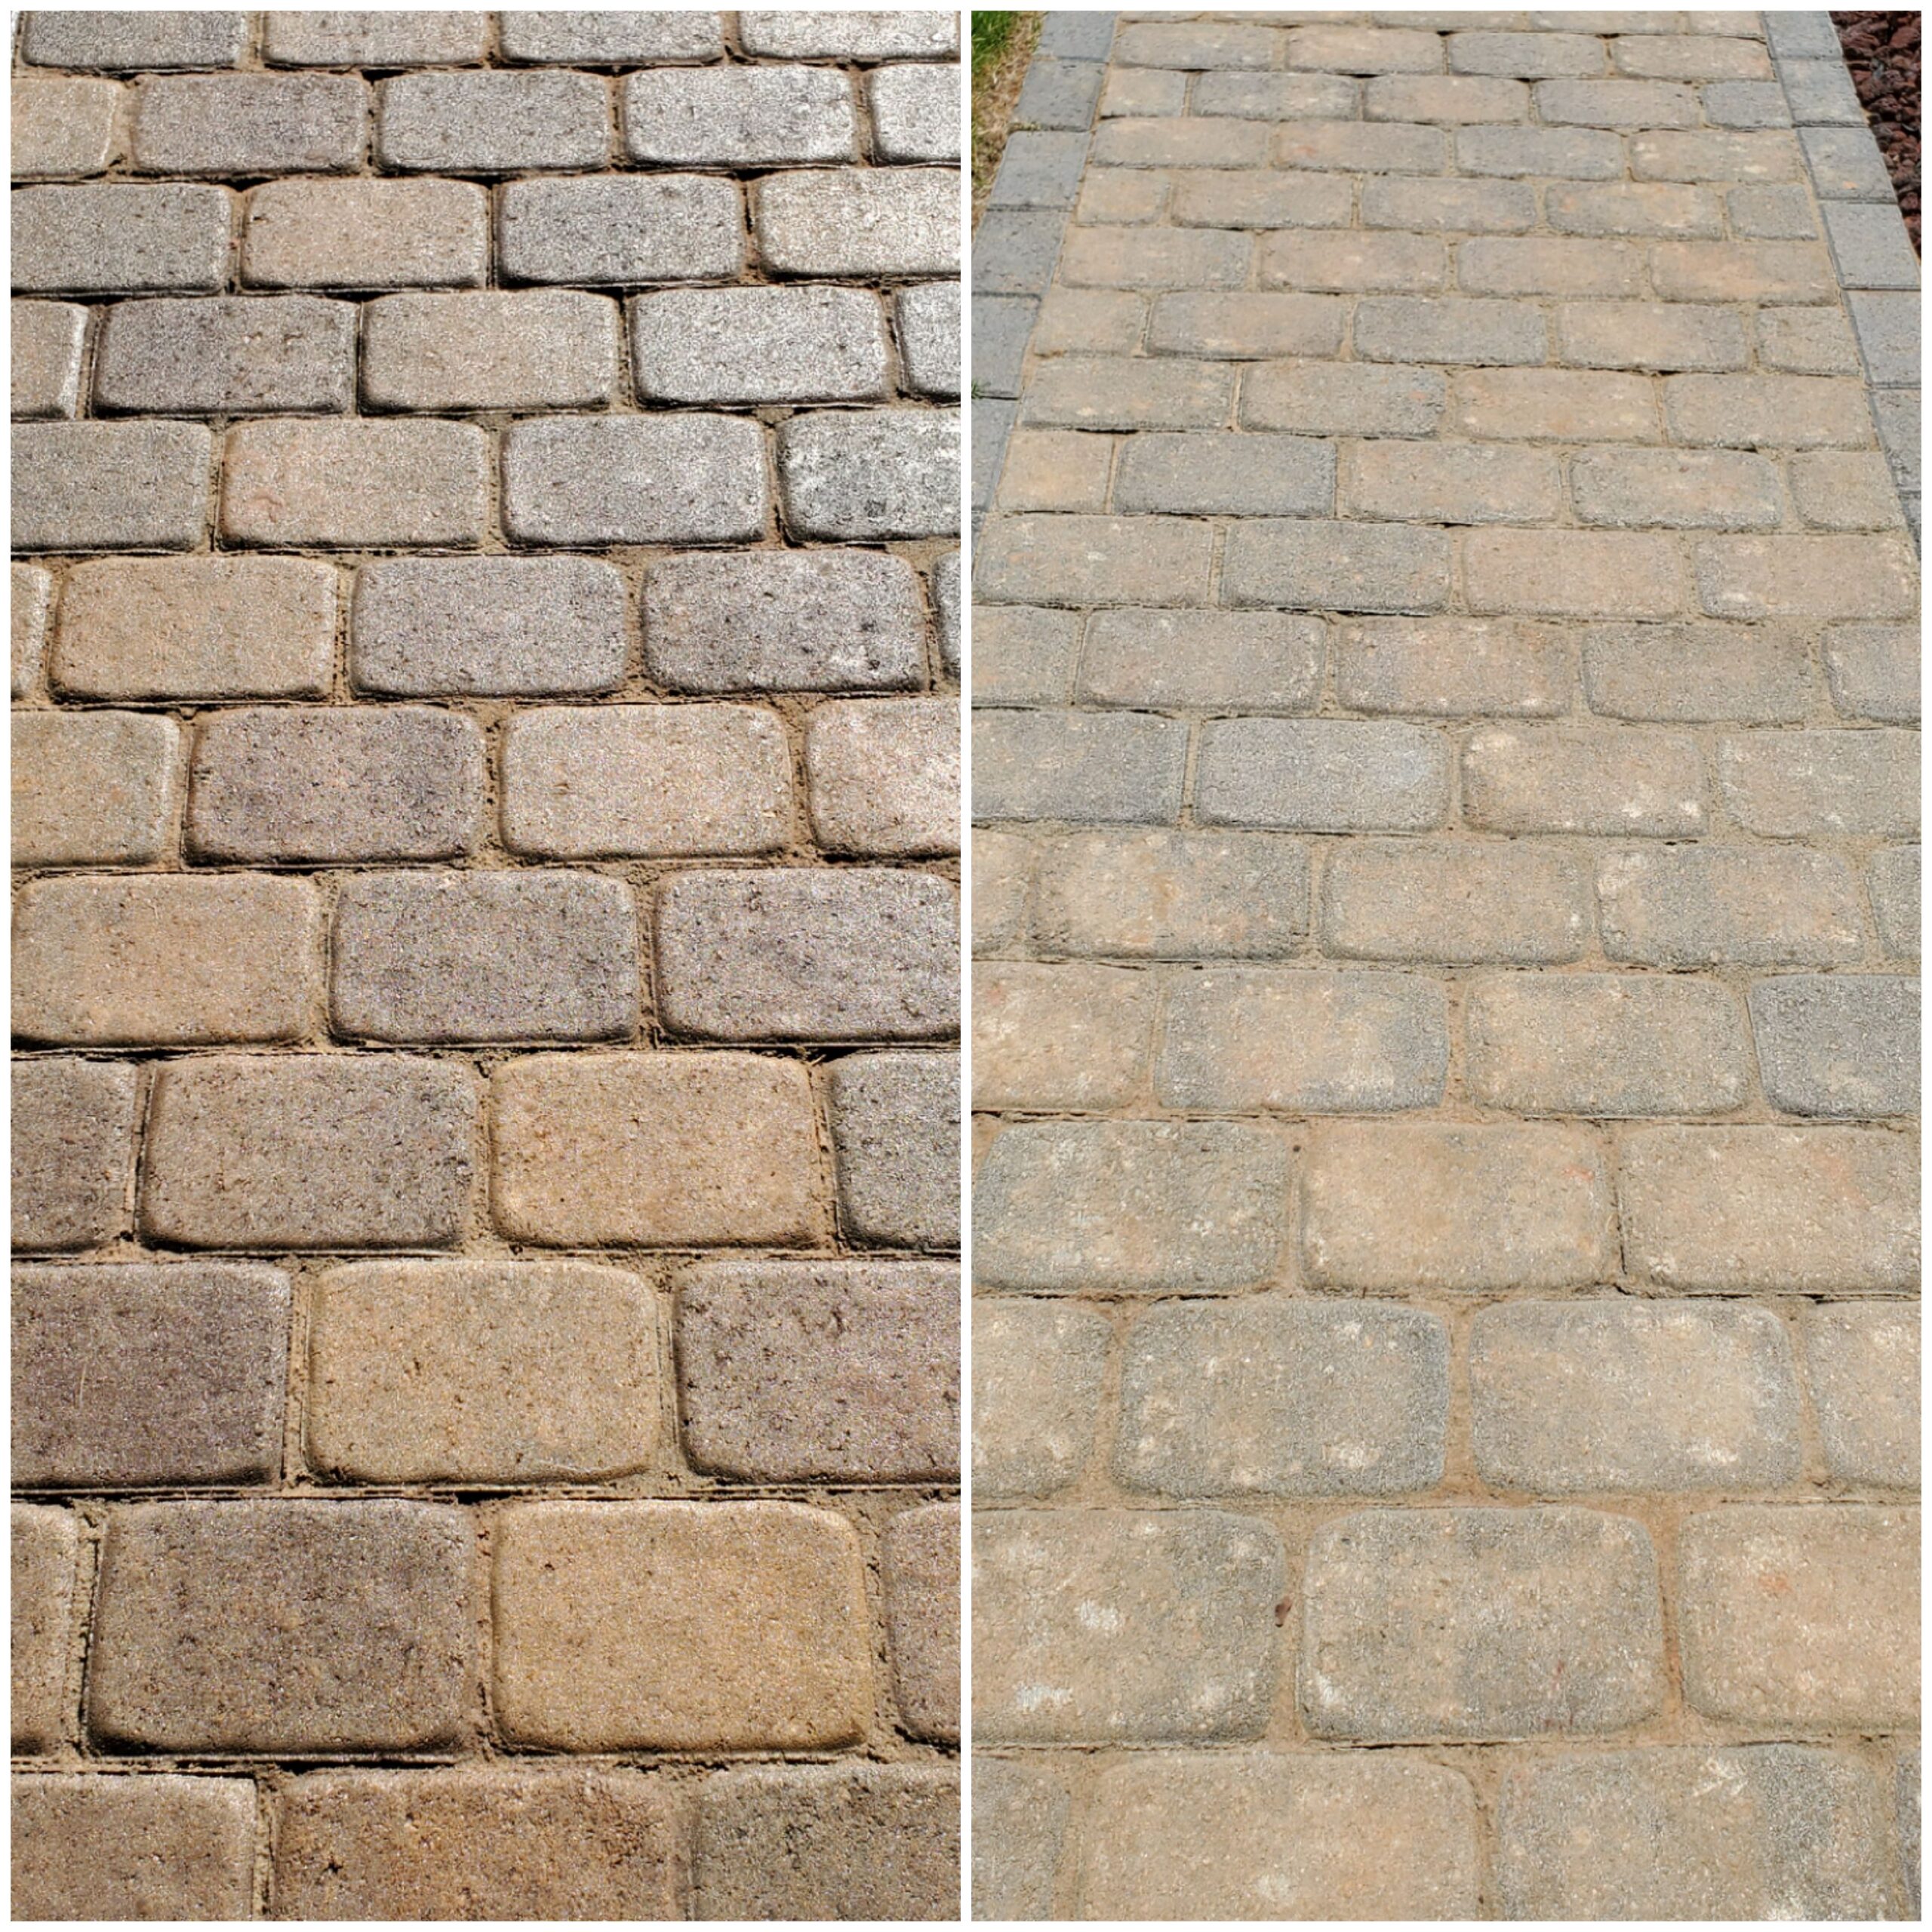 Before and after photo of stained concrete pavers